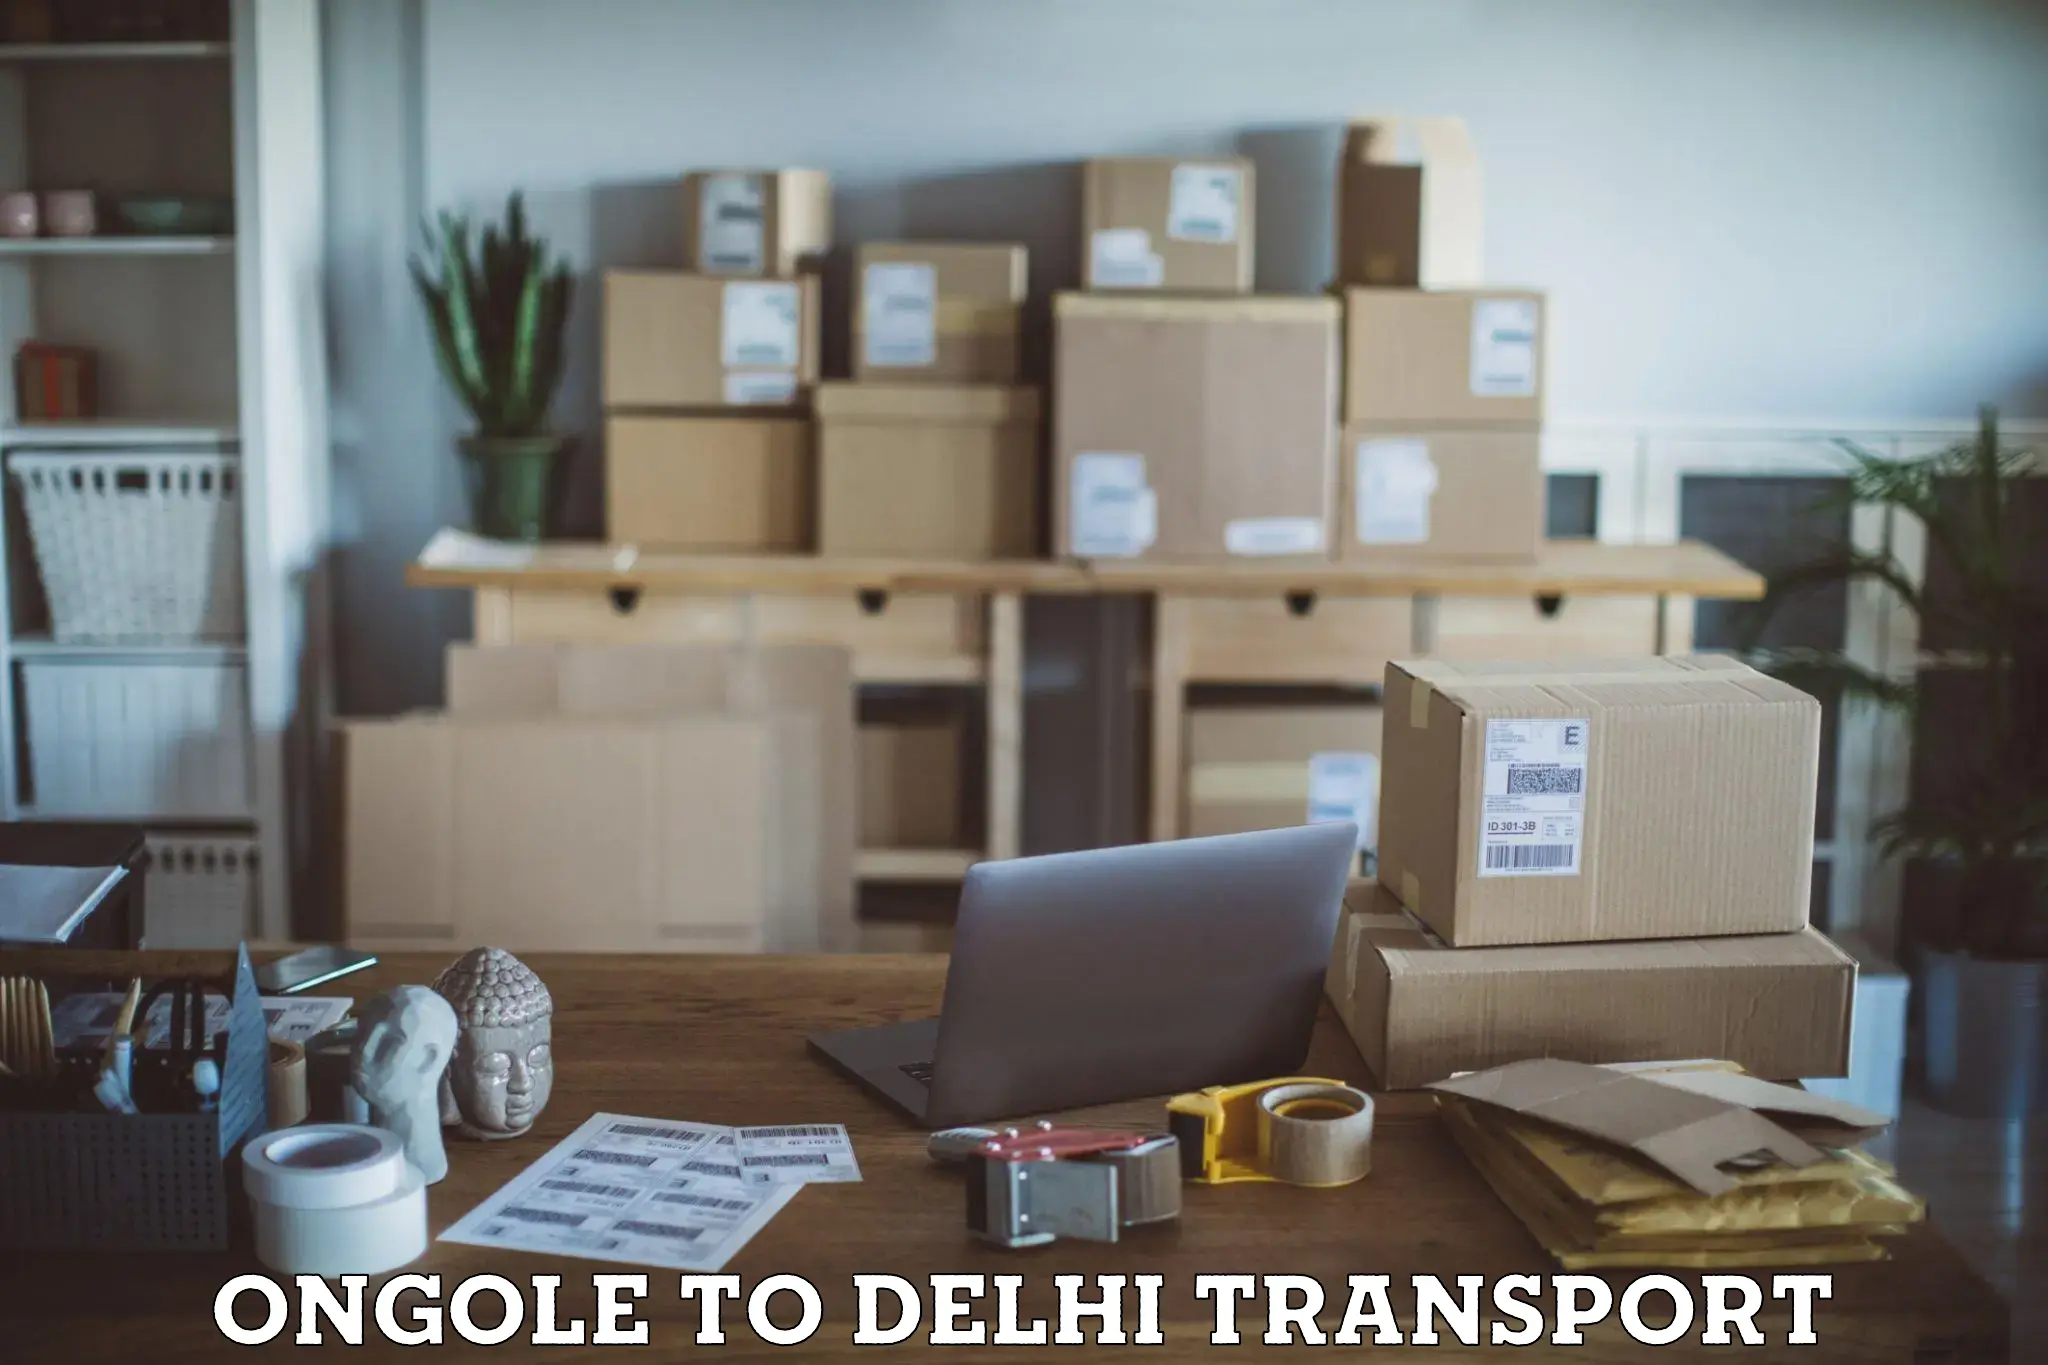 Commercial transport service Ongole to East Delhi